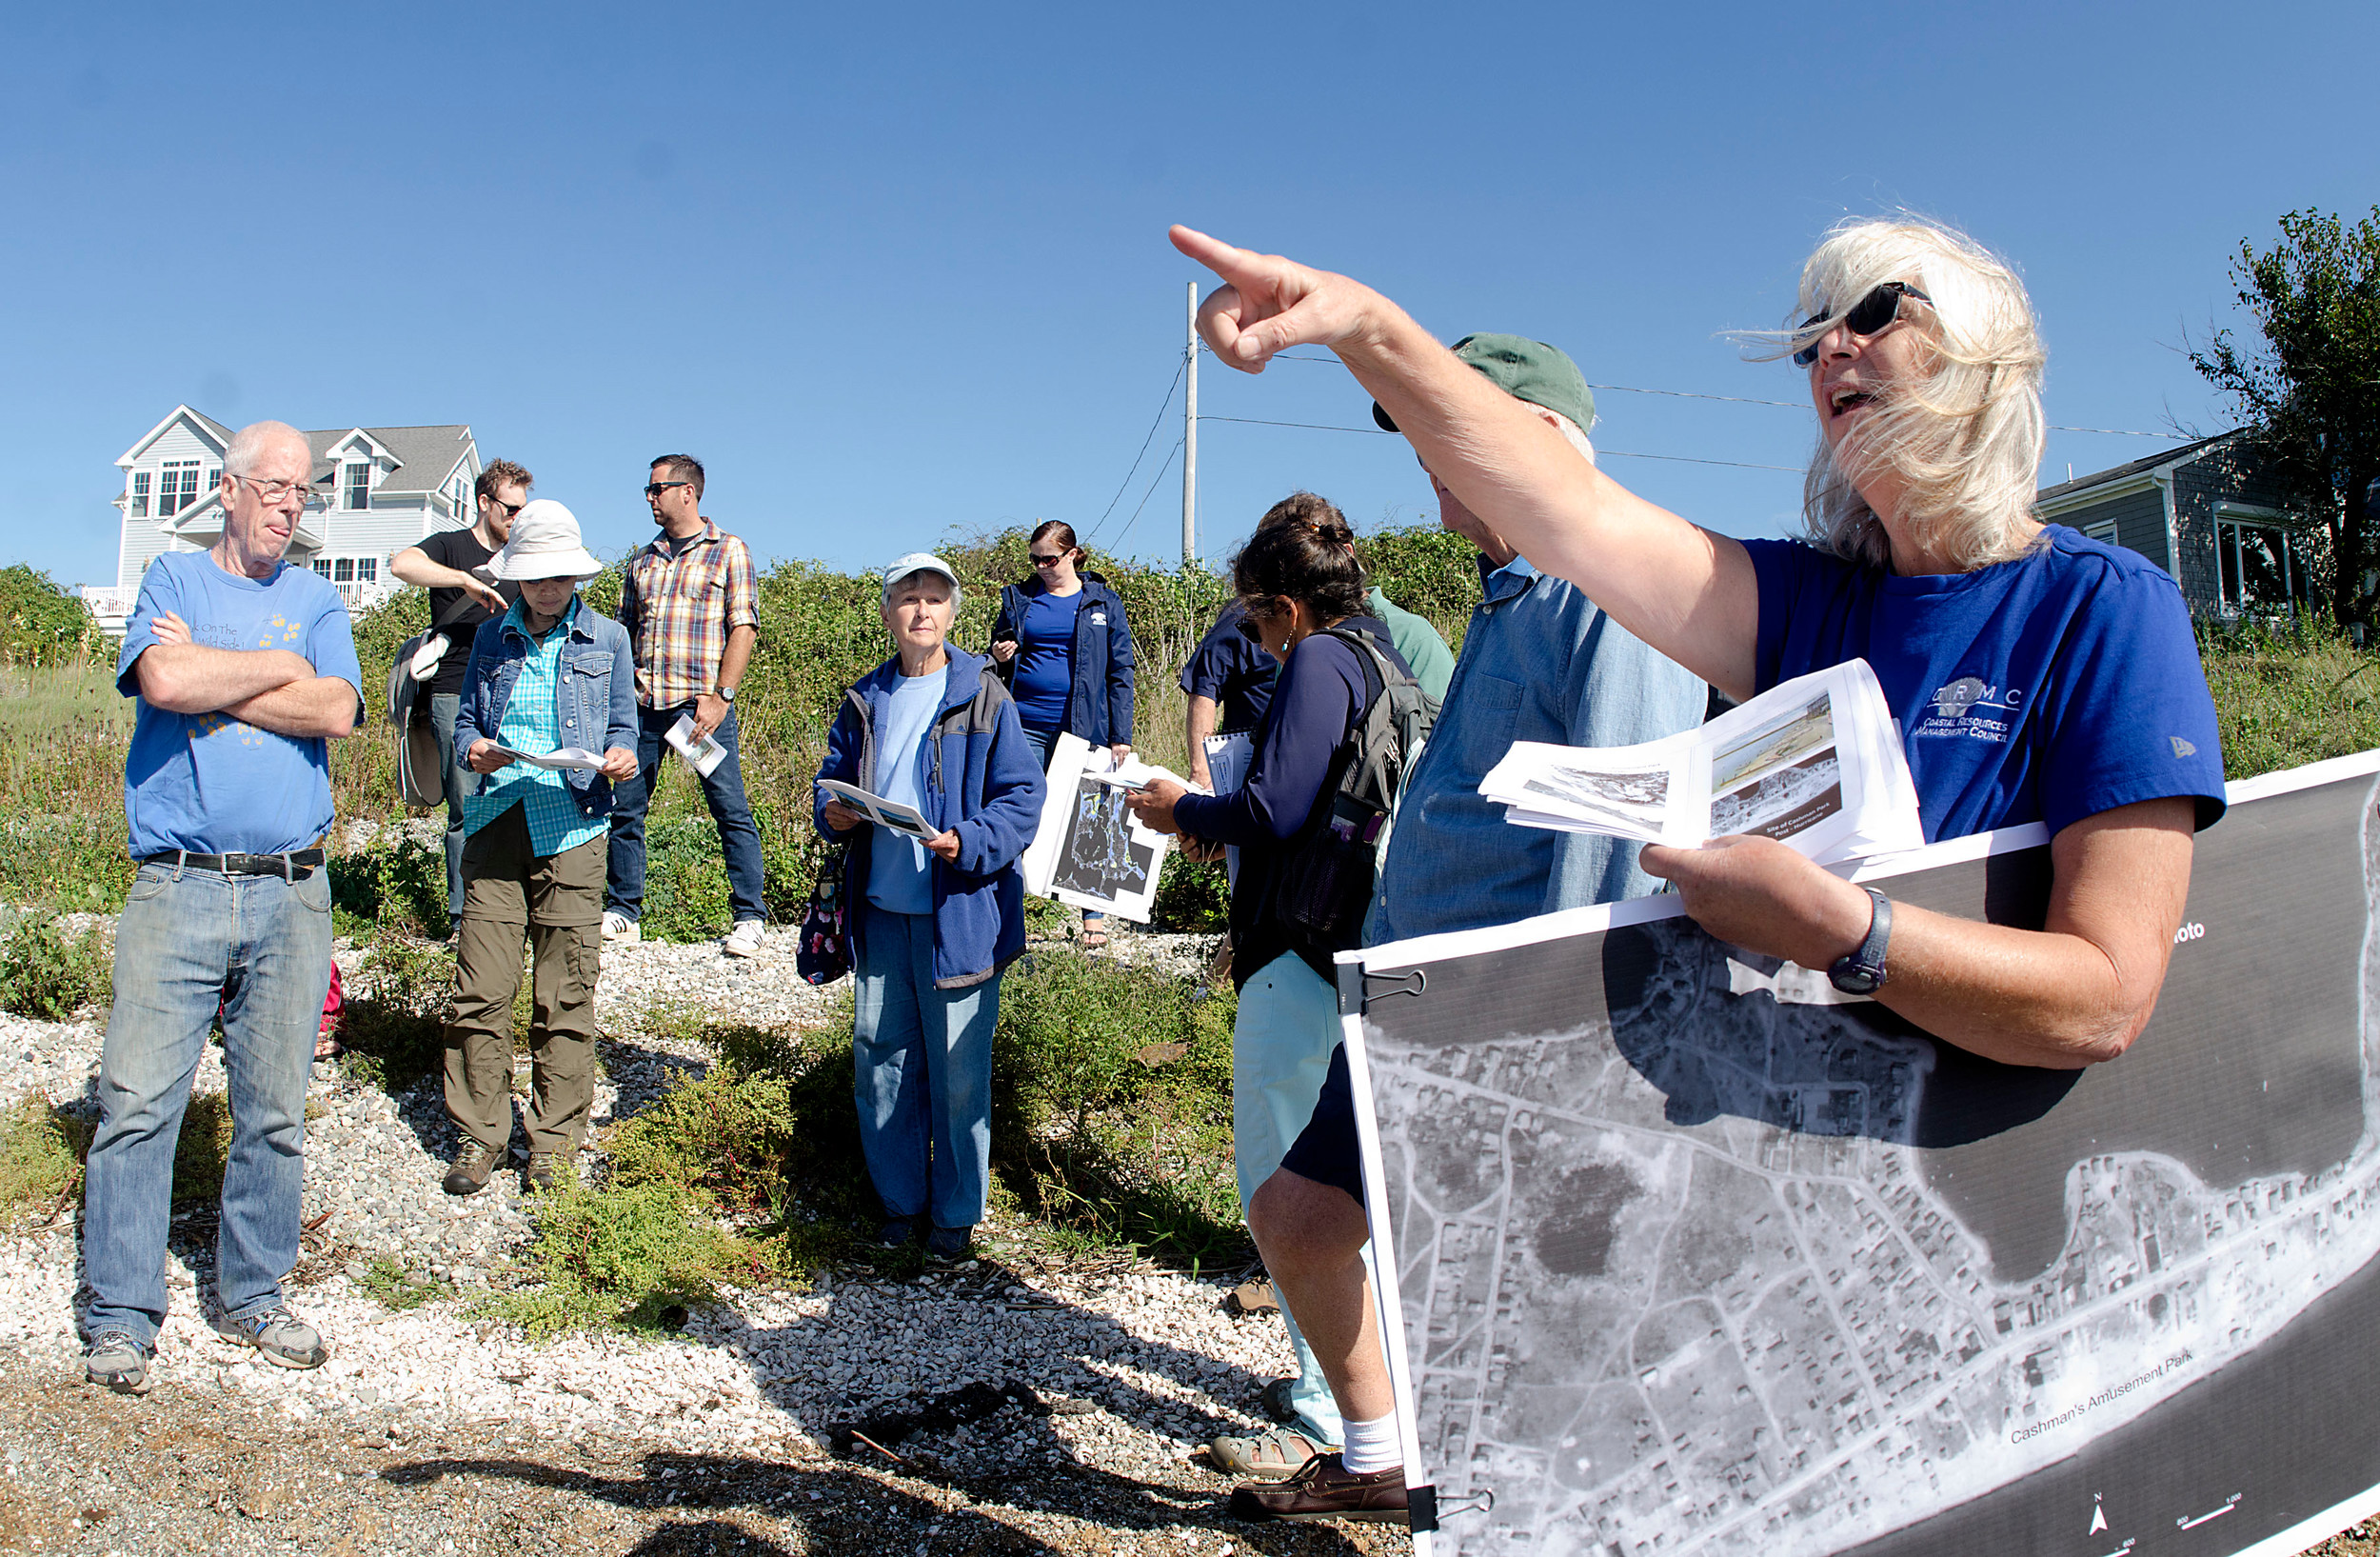 Janet Freedman, a coastal geologist with the R.I. Coastal Resources Management Council (CRMC), speaks about coastal flooding and erosion during a walking tour of Island Park Friday morning.